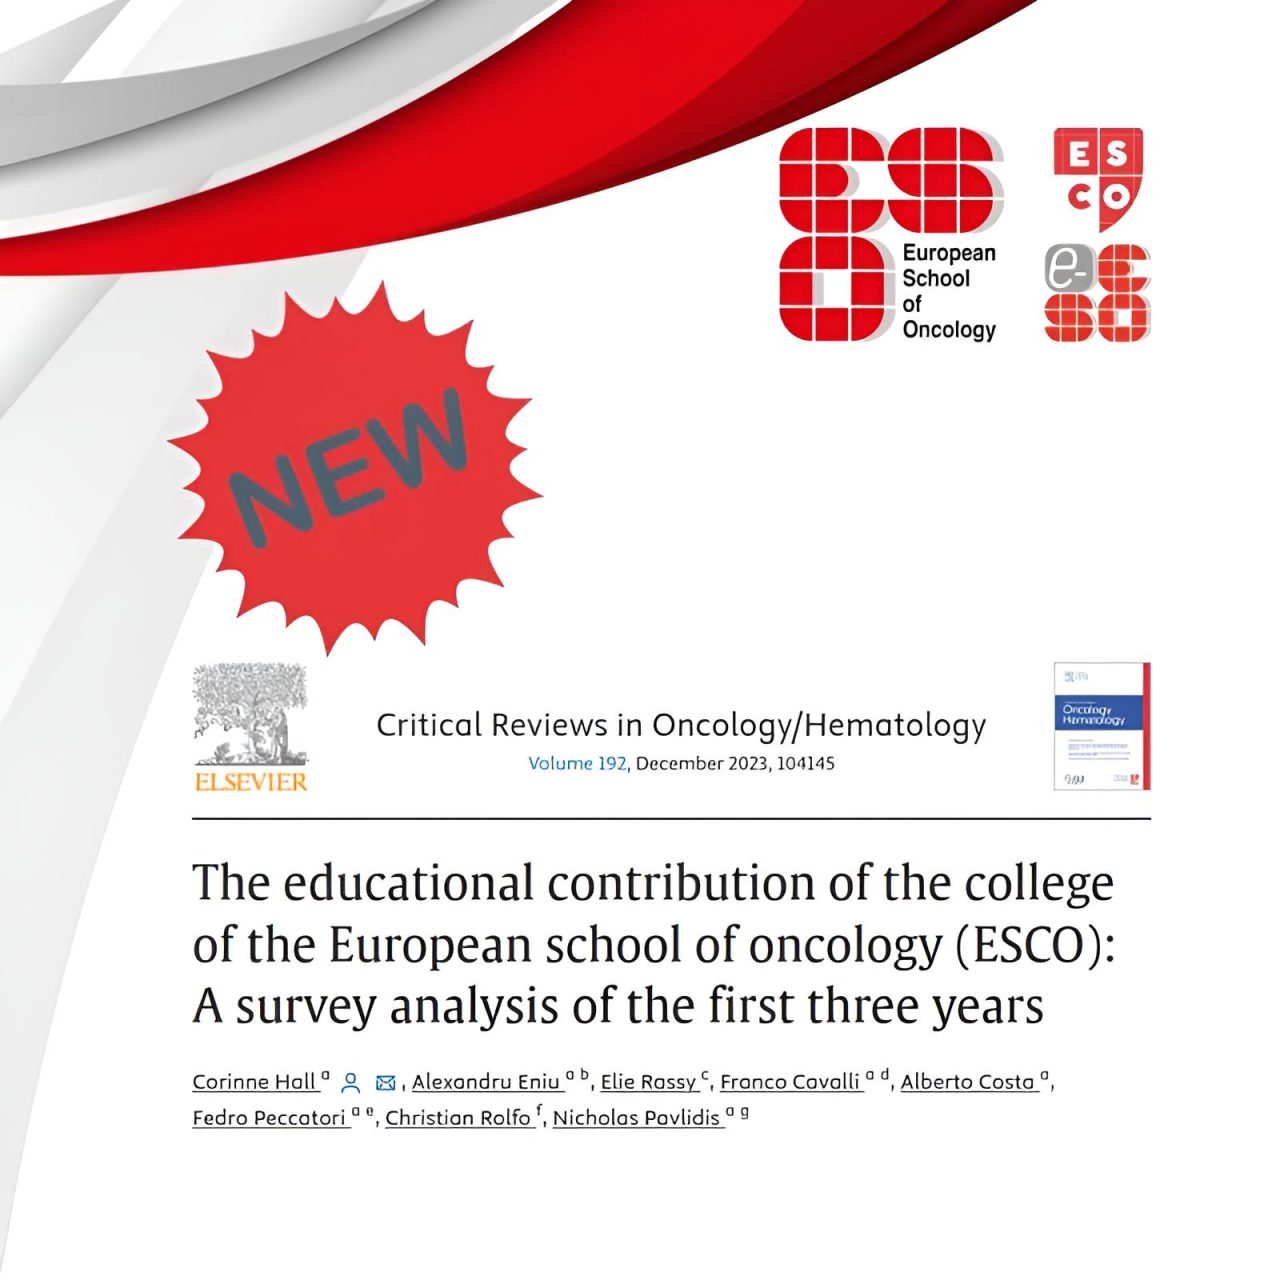 ESCO is making waves in oncology education! – European School of Oncology